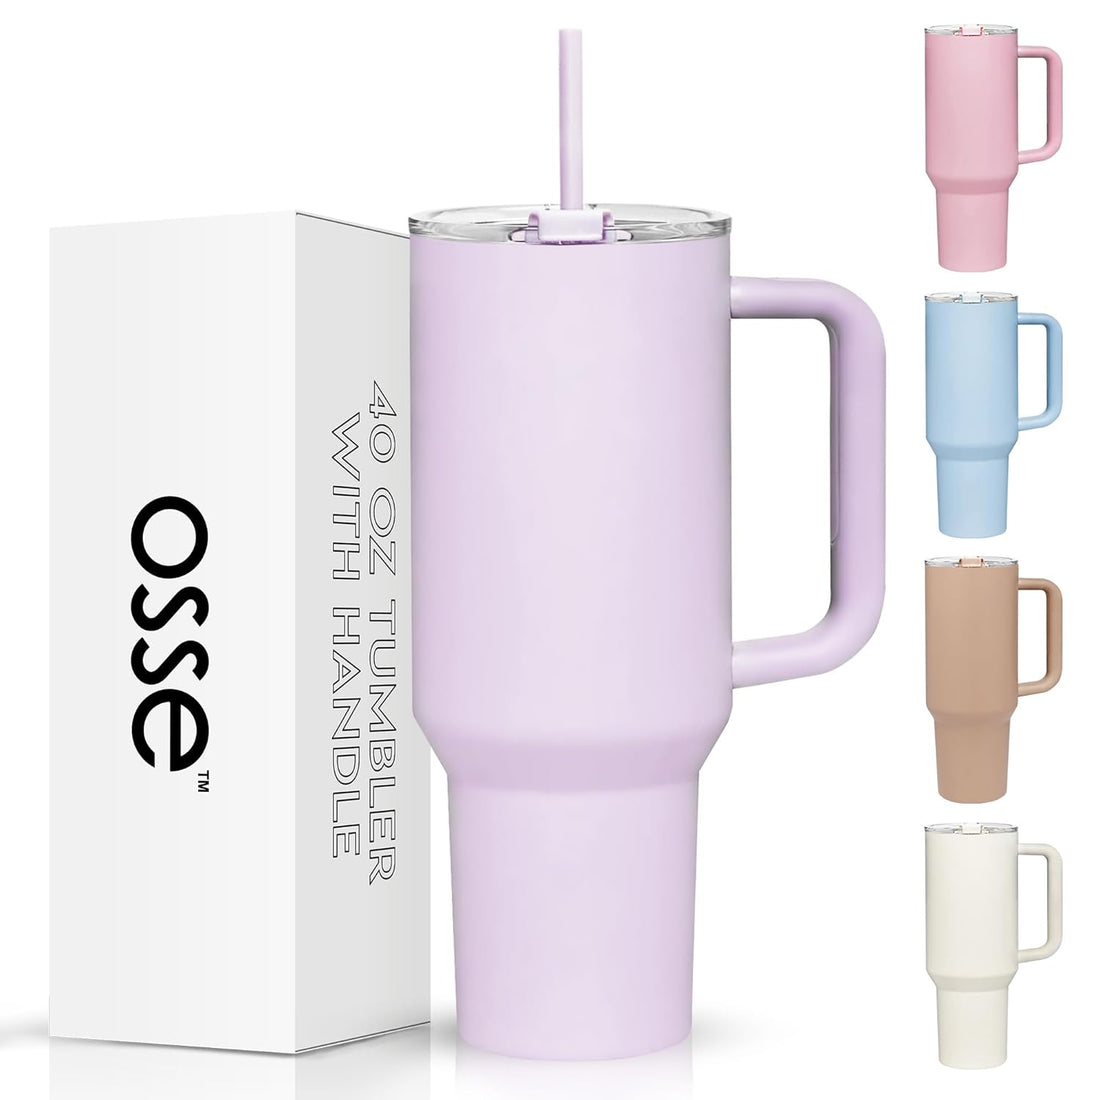 osse 40oz Tumbler with Handle and Straw Lid | Double Wall Vacuum Reusable Stainless Steel Insulated Water Bottle Travel Mug Cup | Modern Insulated Tumblers Cupholder Friendly (Orchid)